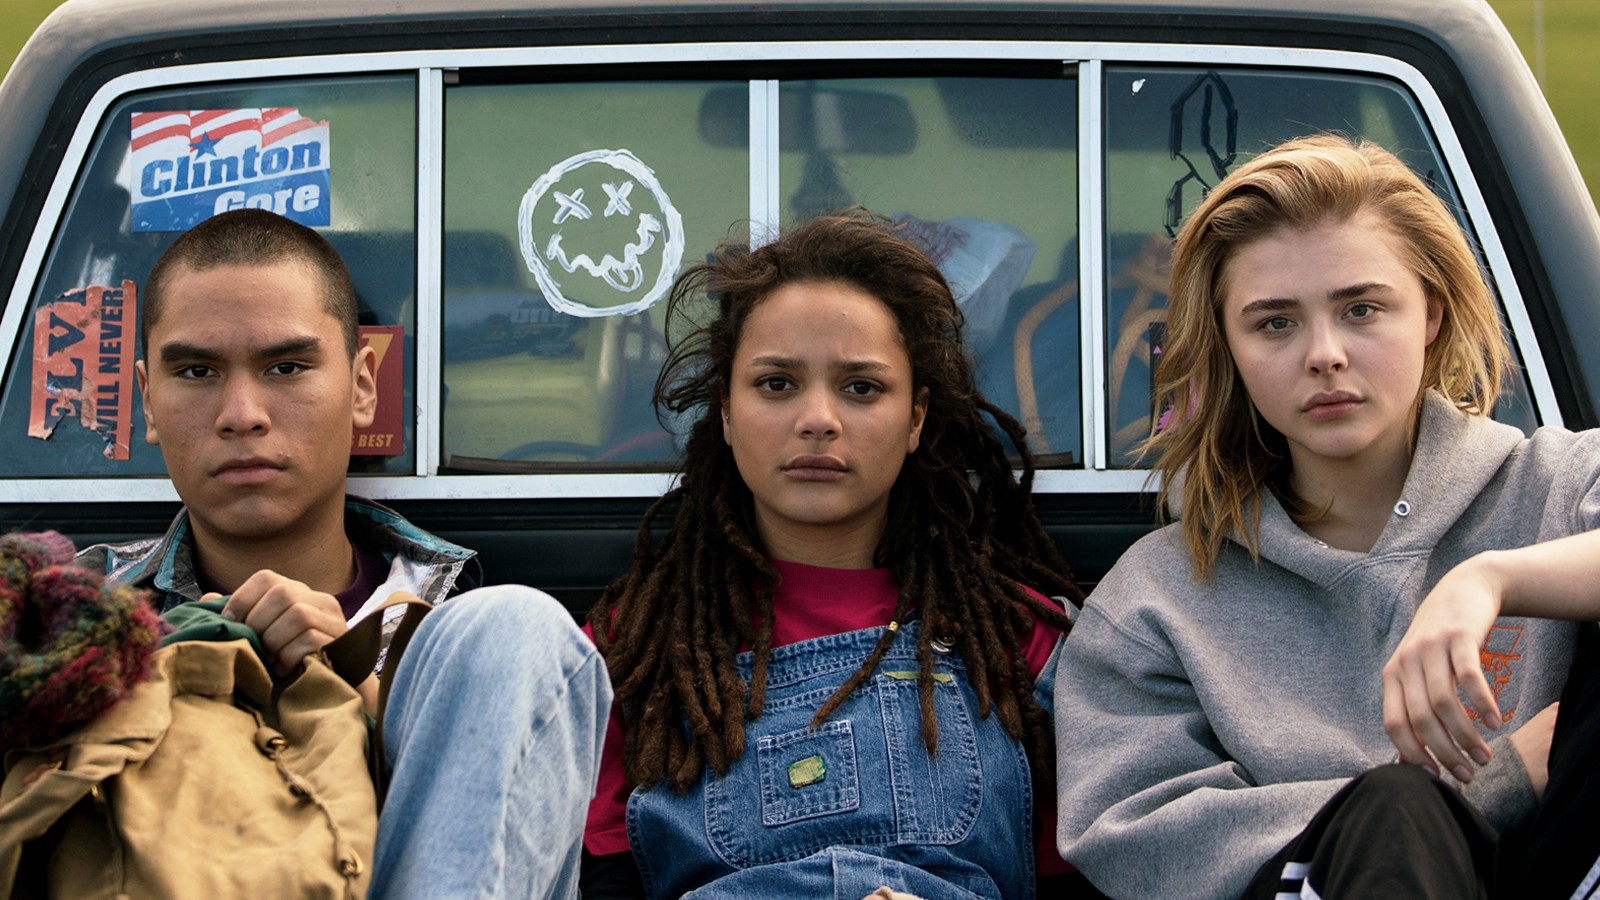 The Miseducation of Cameron Post takes us to Christian gay conversion therapy